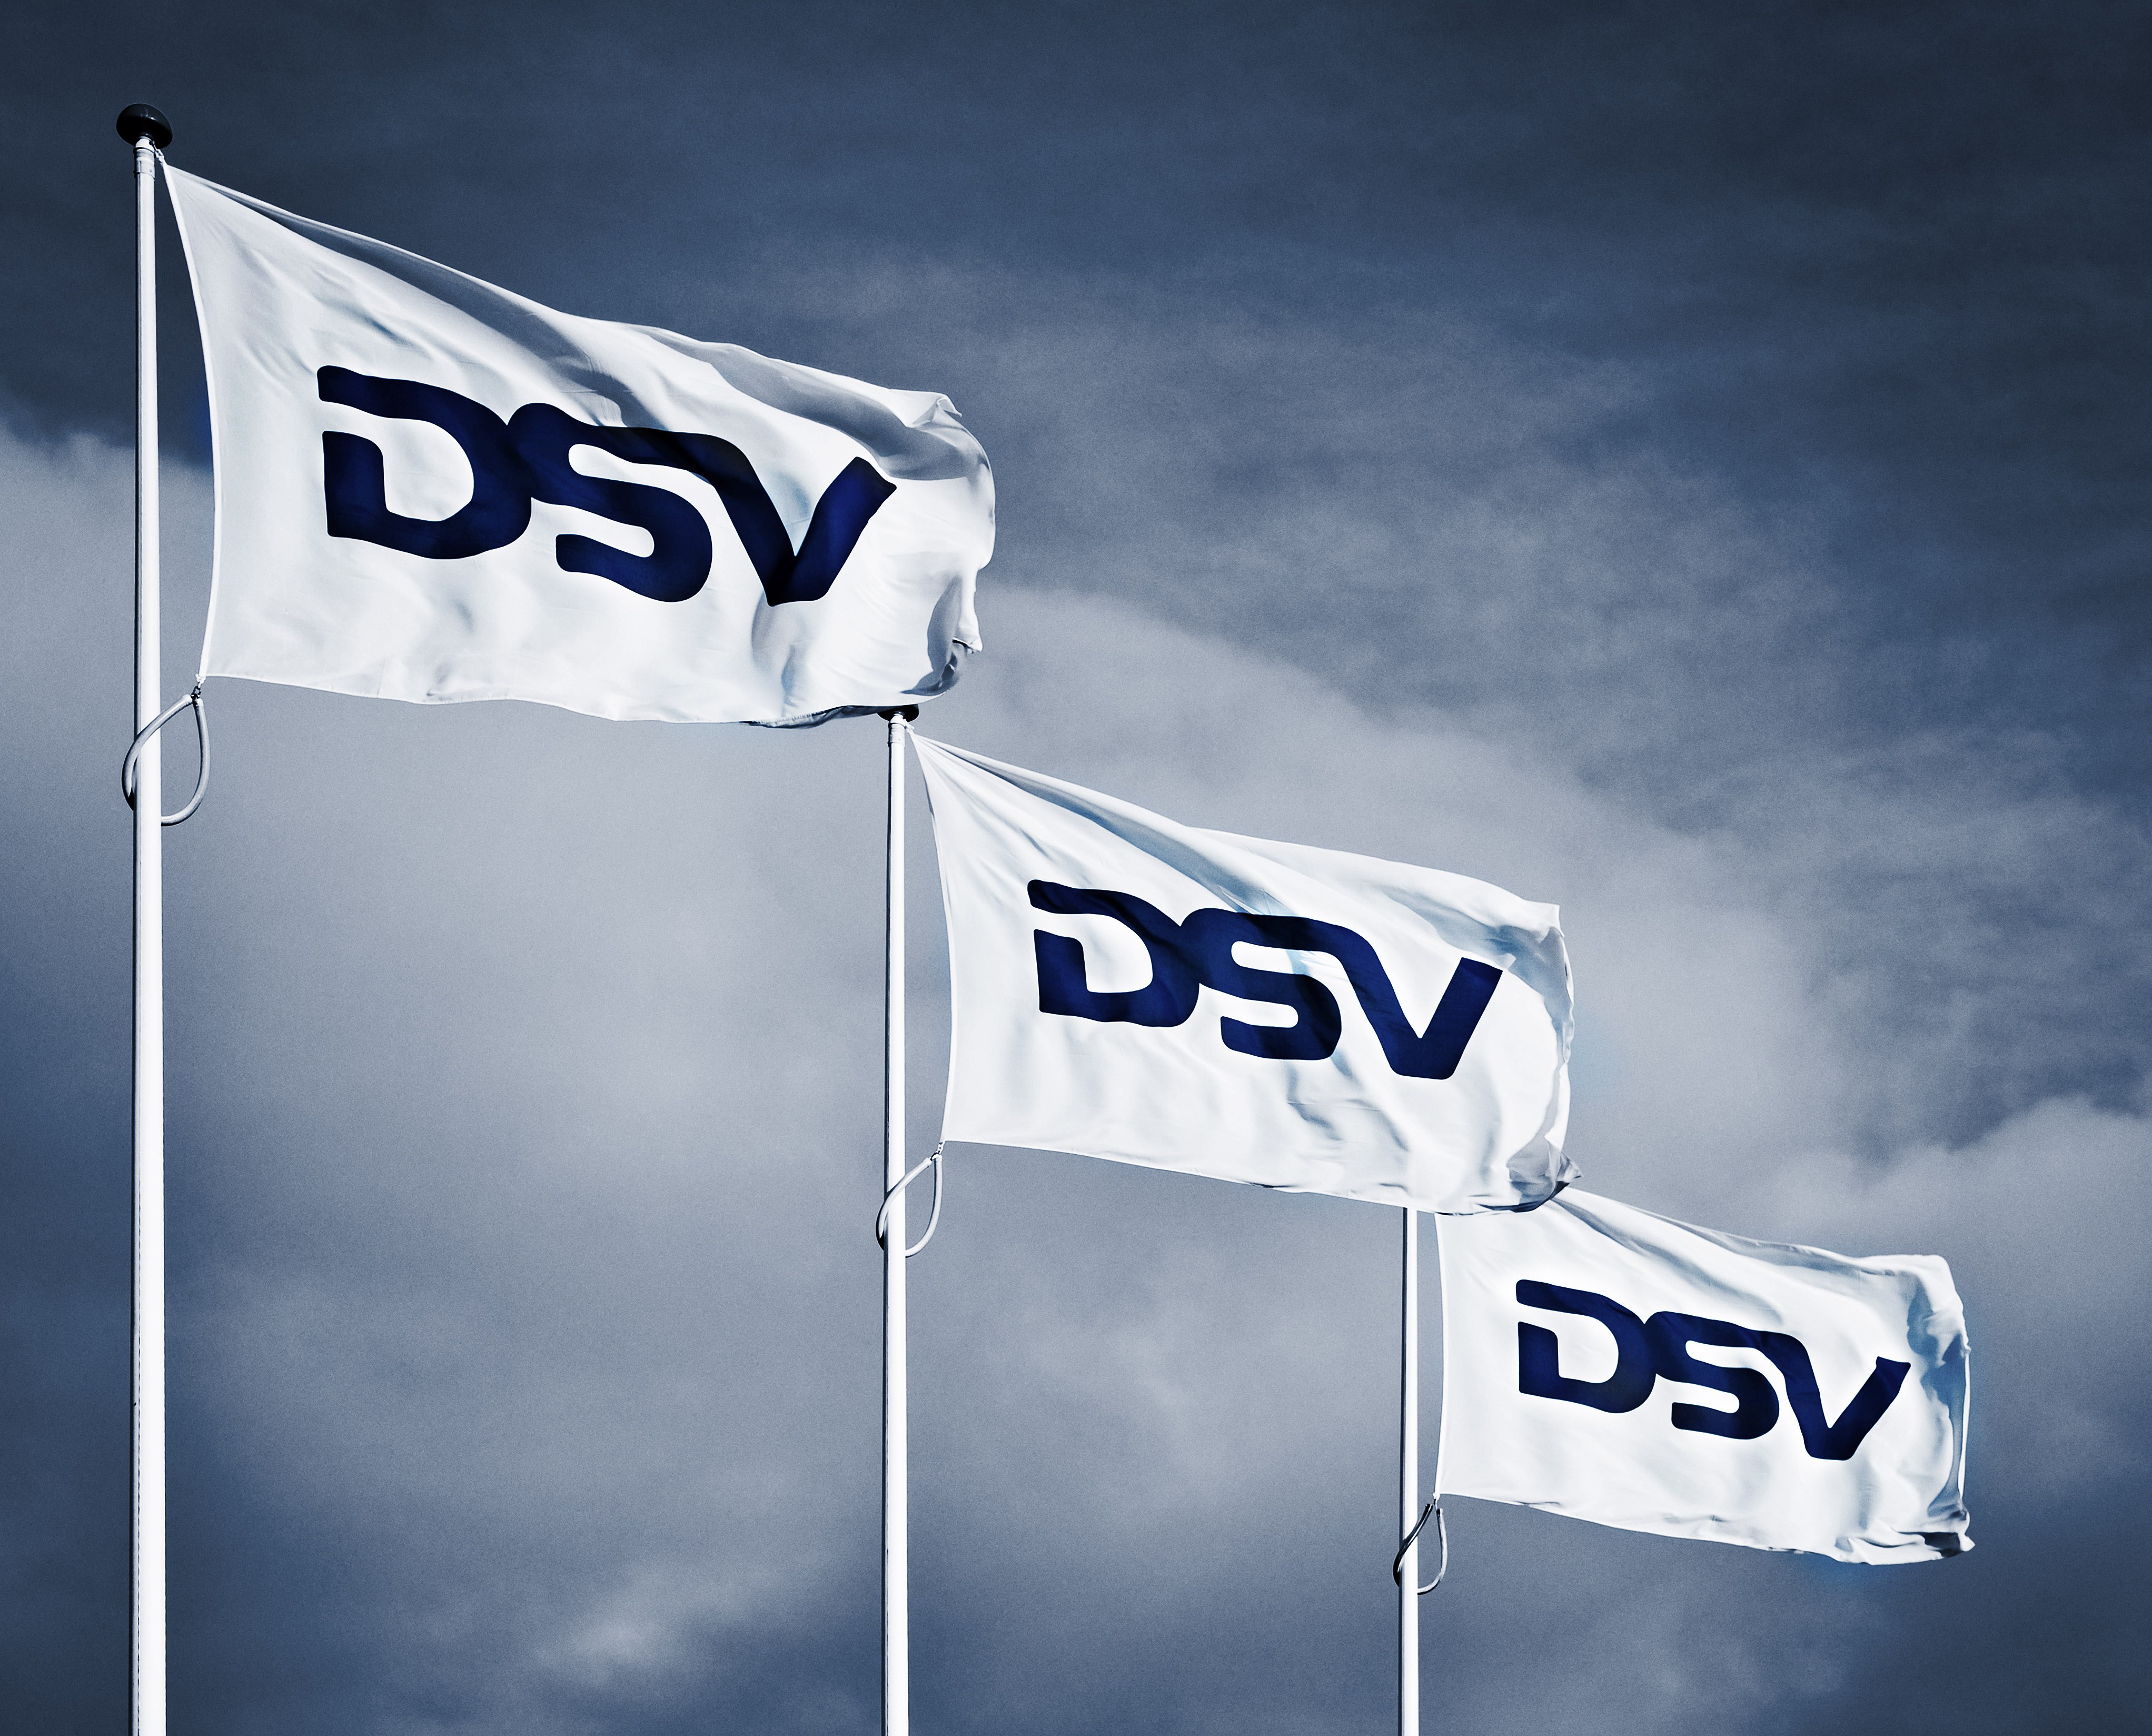 2015 was the best year ever for DSV